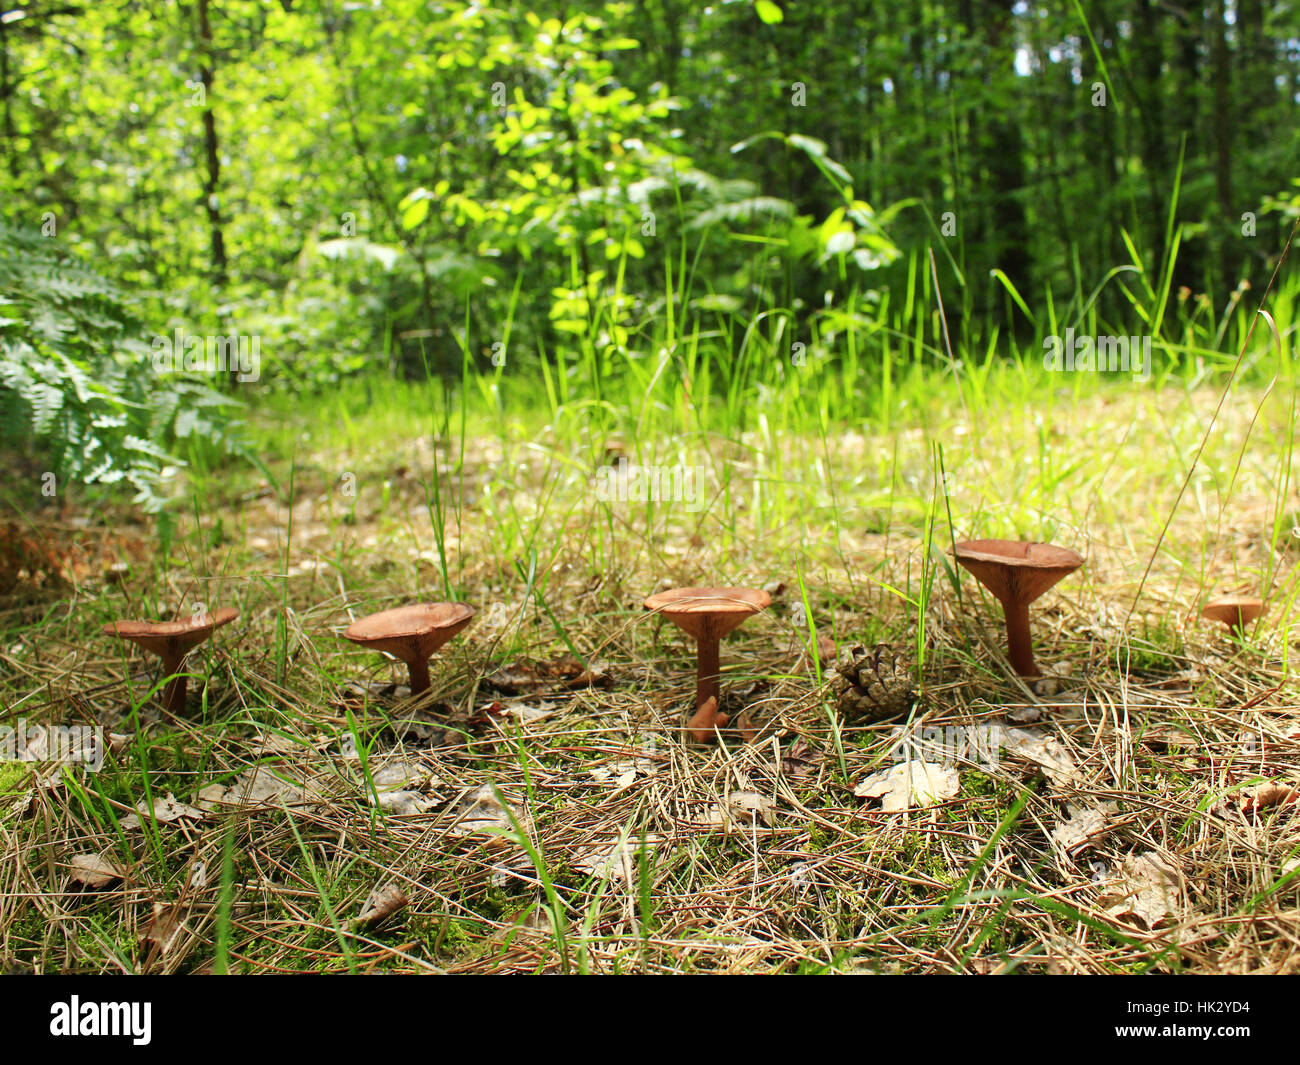 inedible mushrooms of toadstool growing in the row in the forest Stock Photo